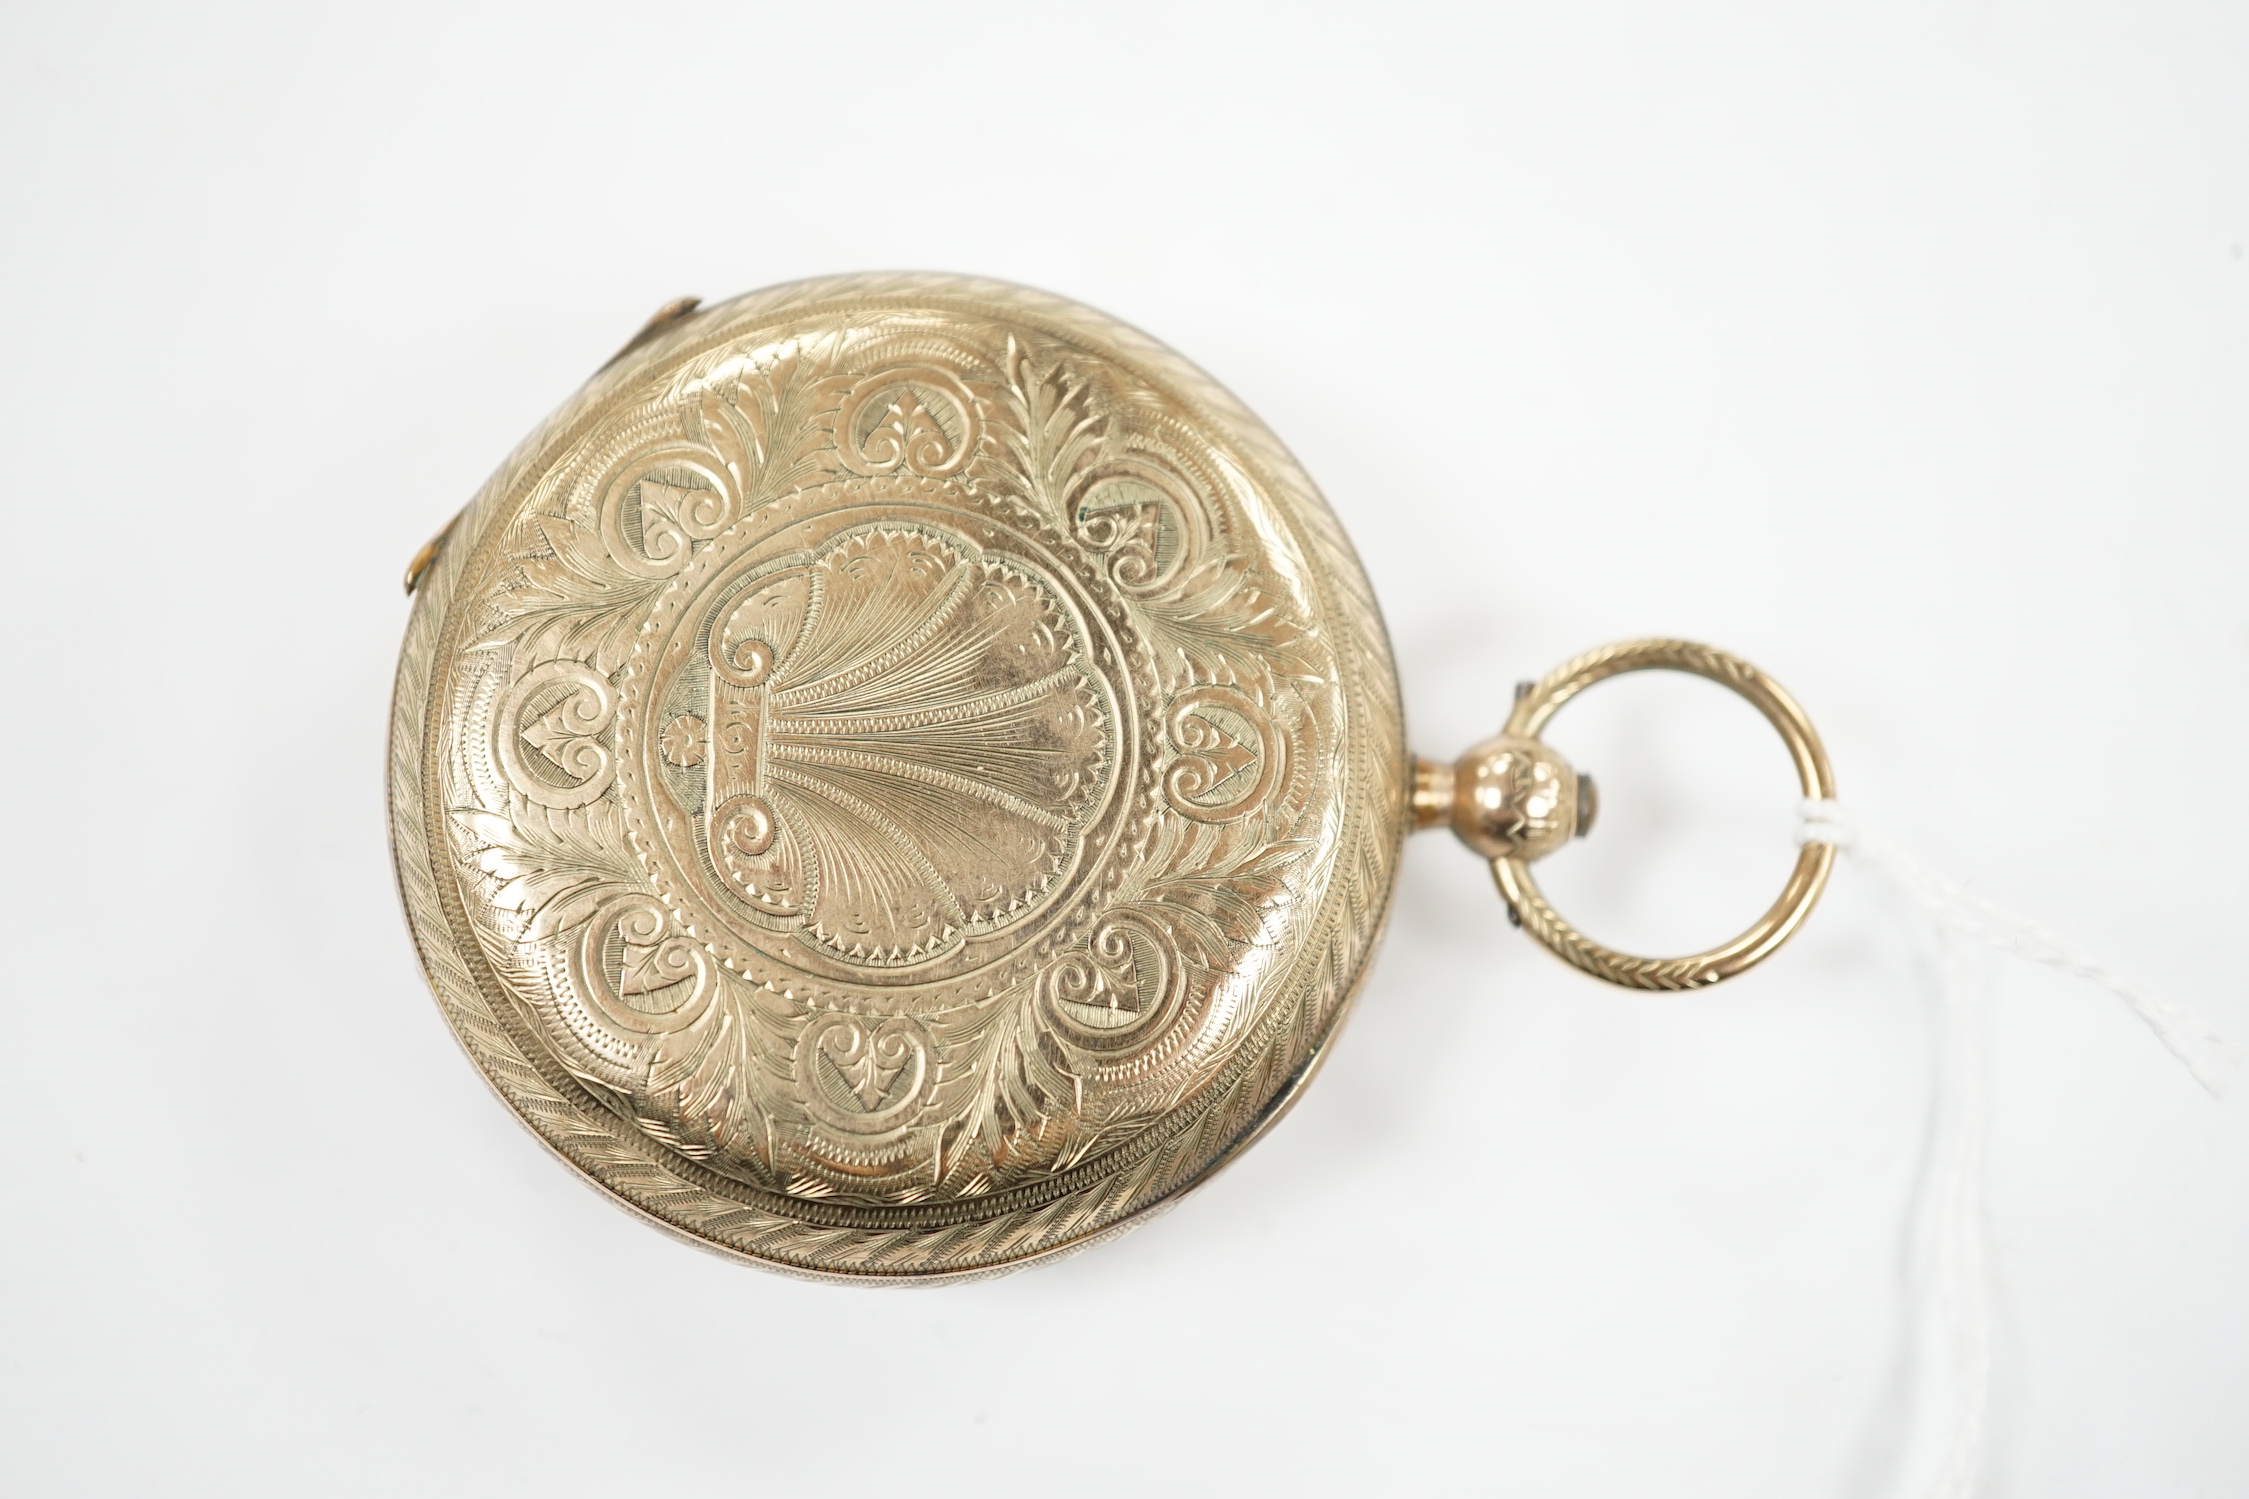 An Edwardian engraved 9ct gold keywind hunter pocket watch by John Forrest, London, chronometer maker to the Admiralty